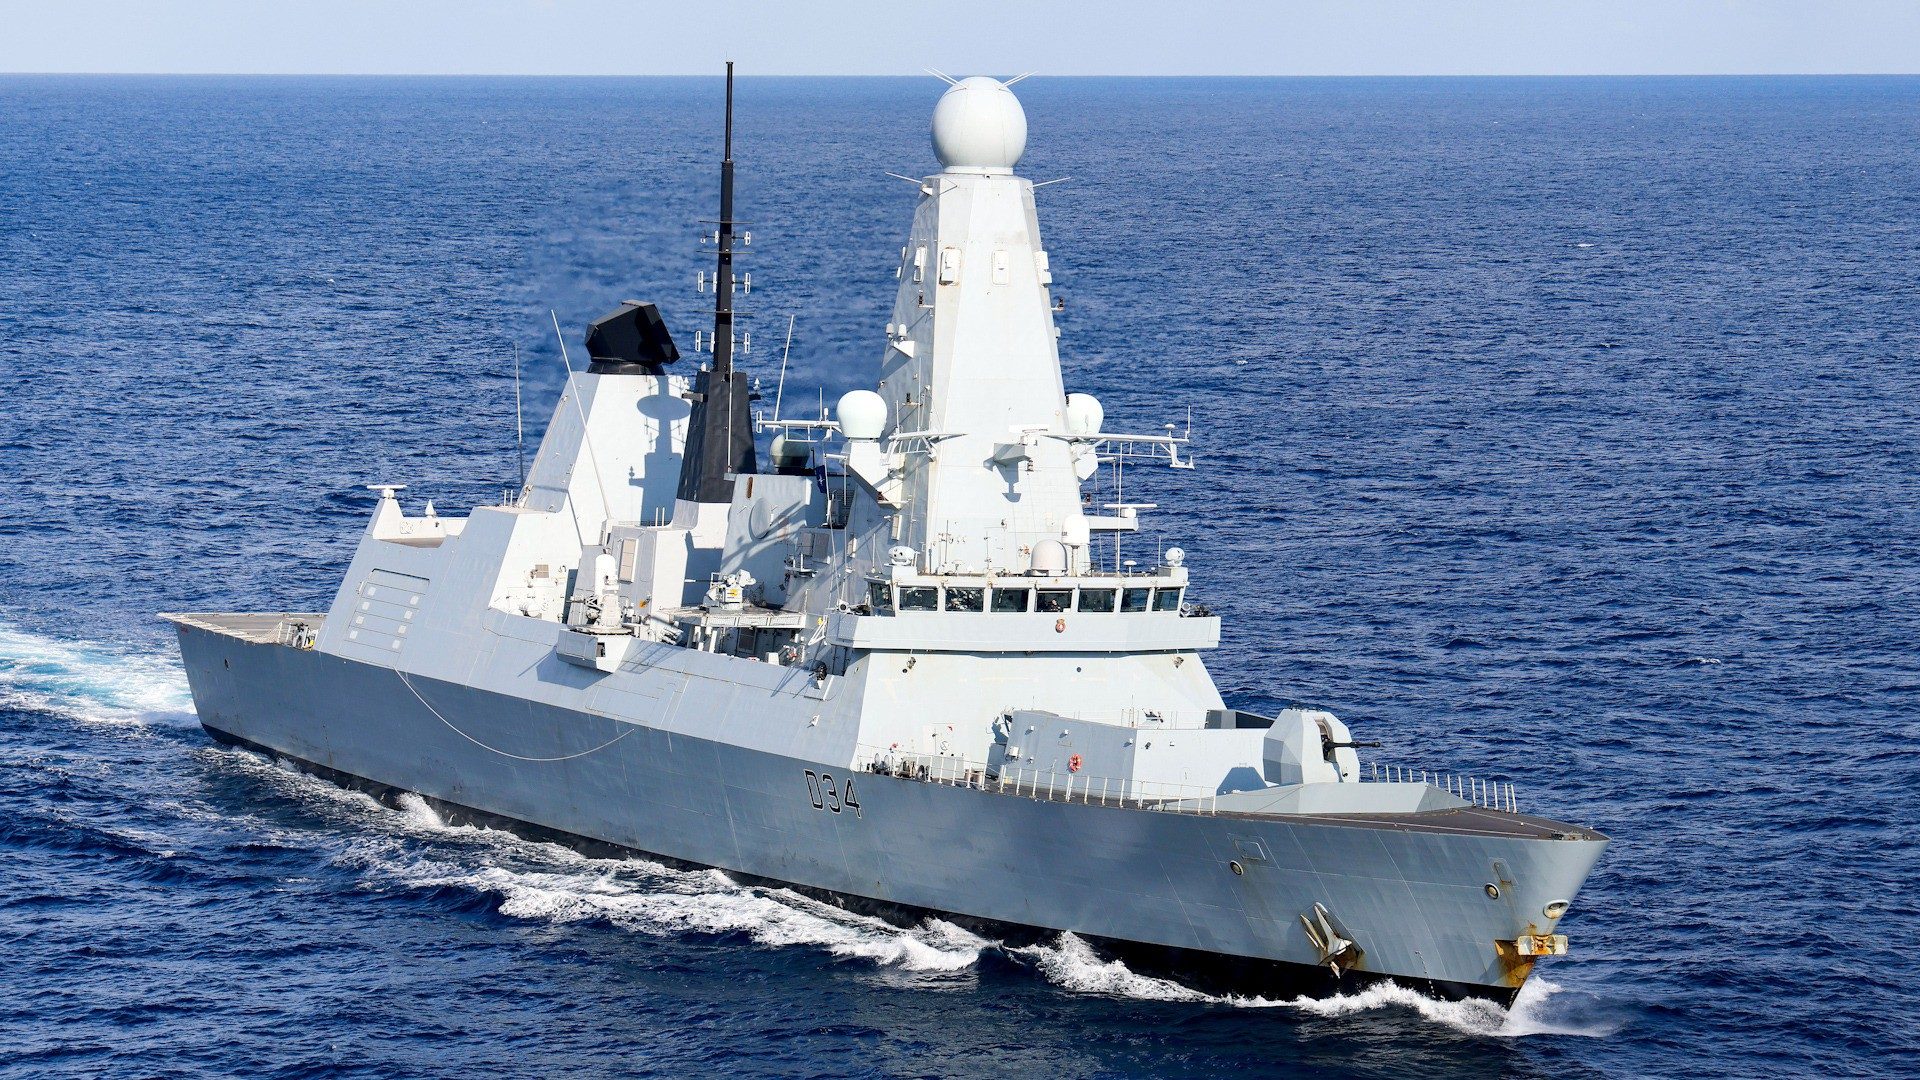 royal navy ship shoots down ballistic missile in combat for first time